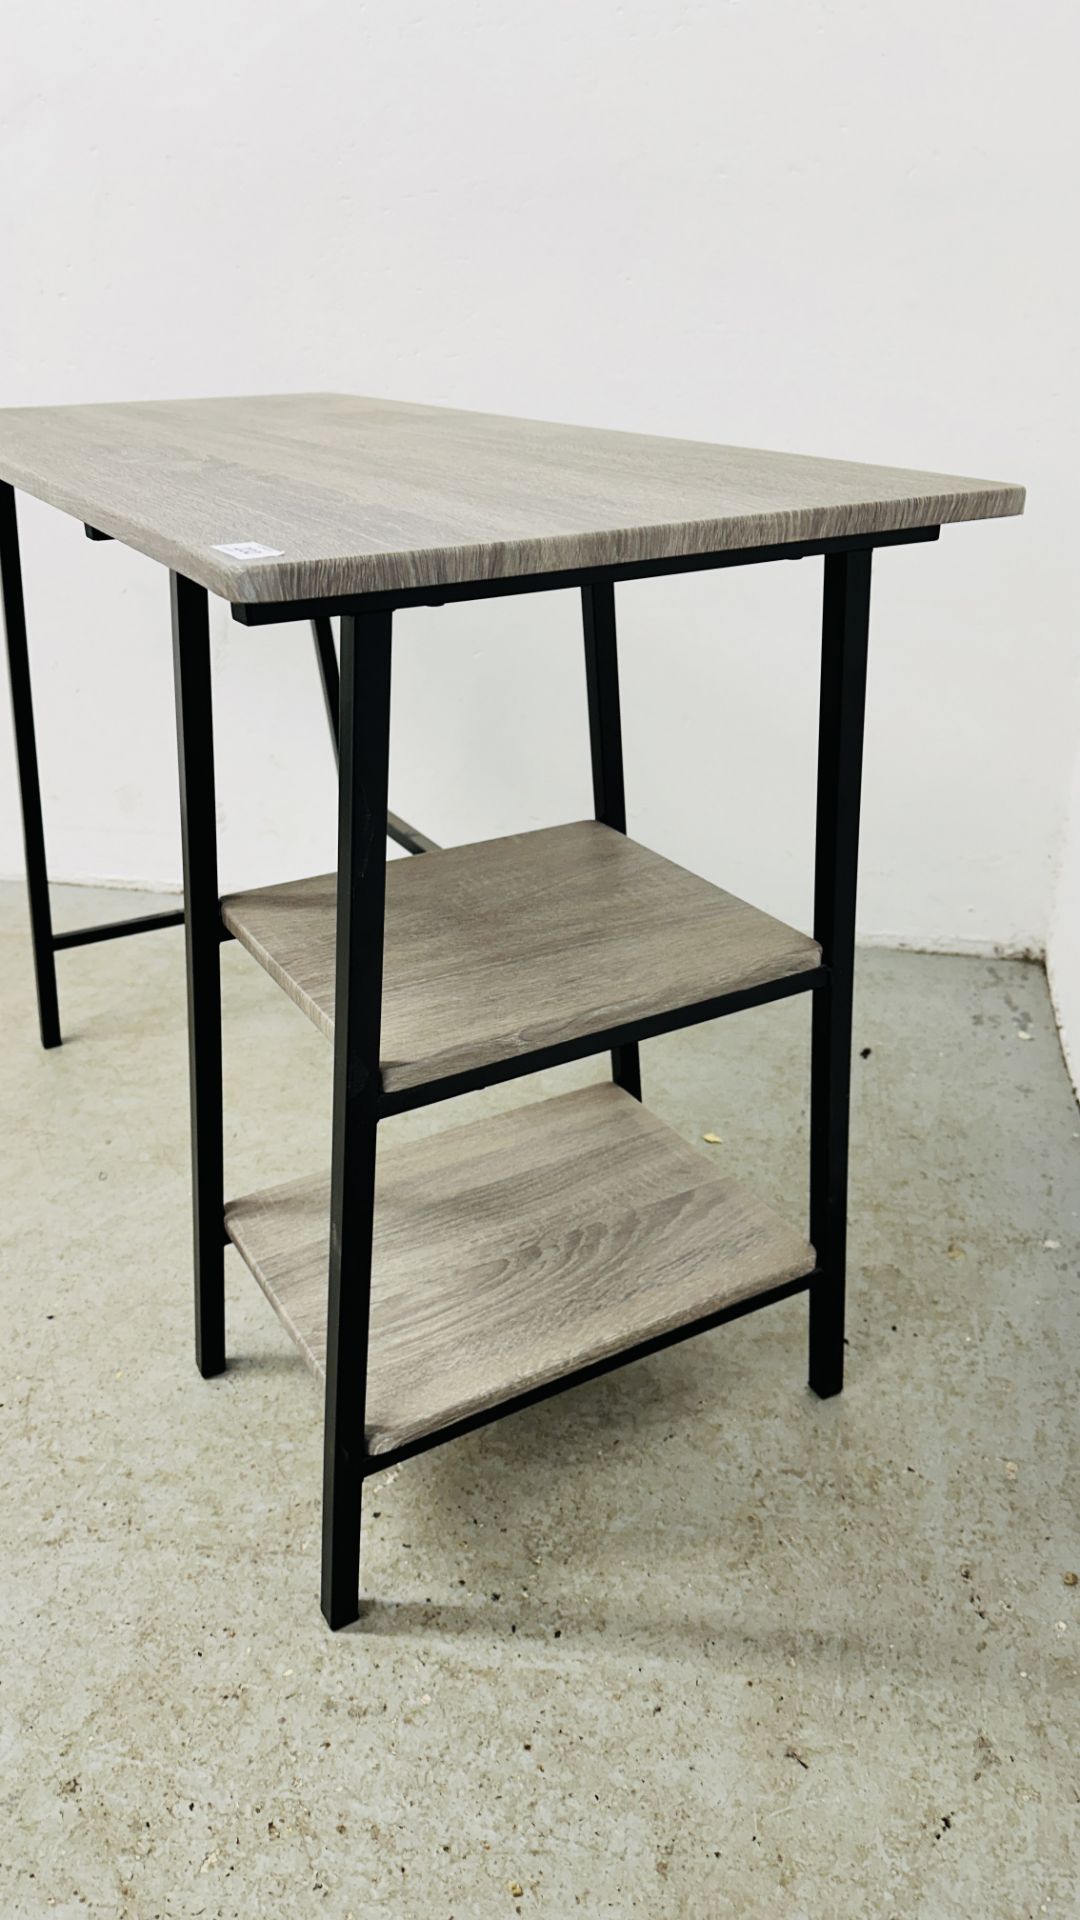 A MODERN LIMEWOOD EFFECT DESK WITH 2 LOWER SHELVES 105CM X 47CM. - Image 7 of 7